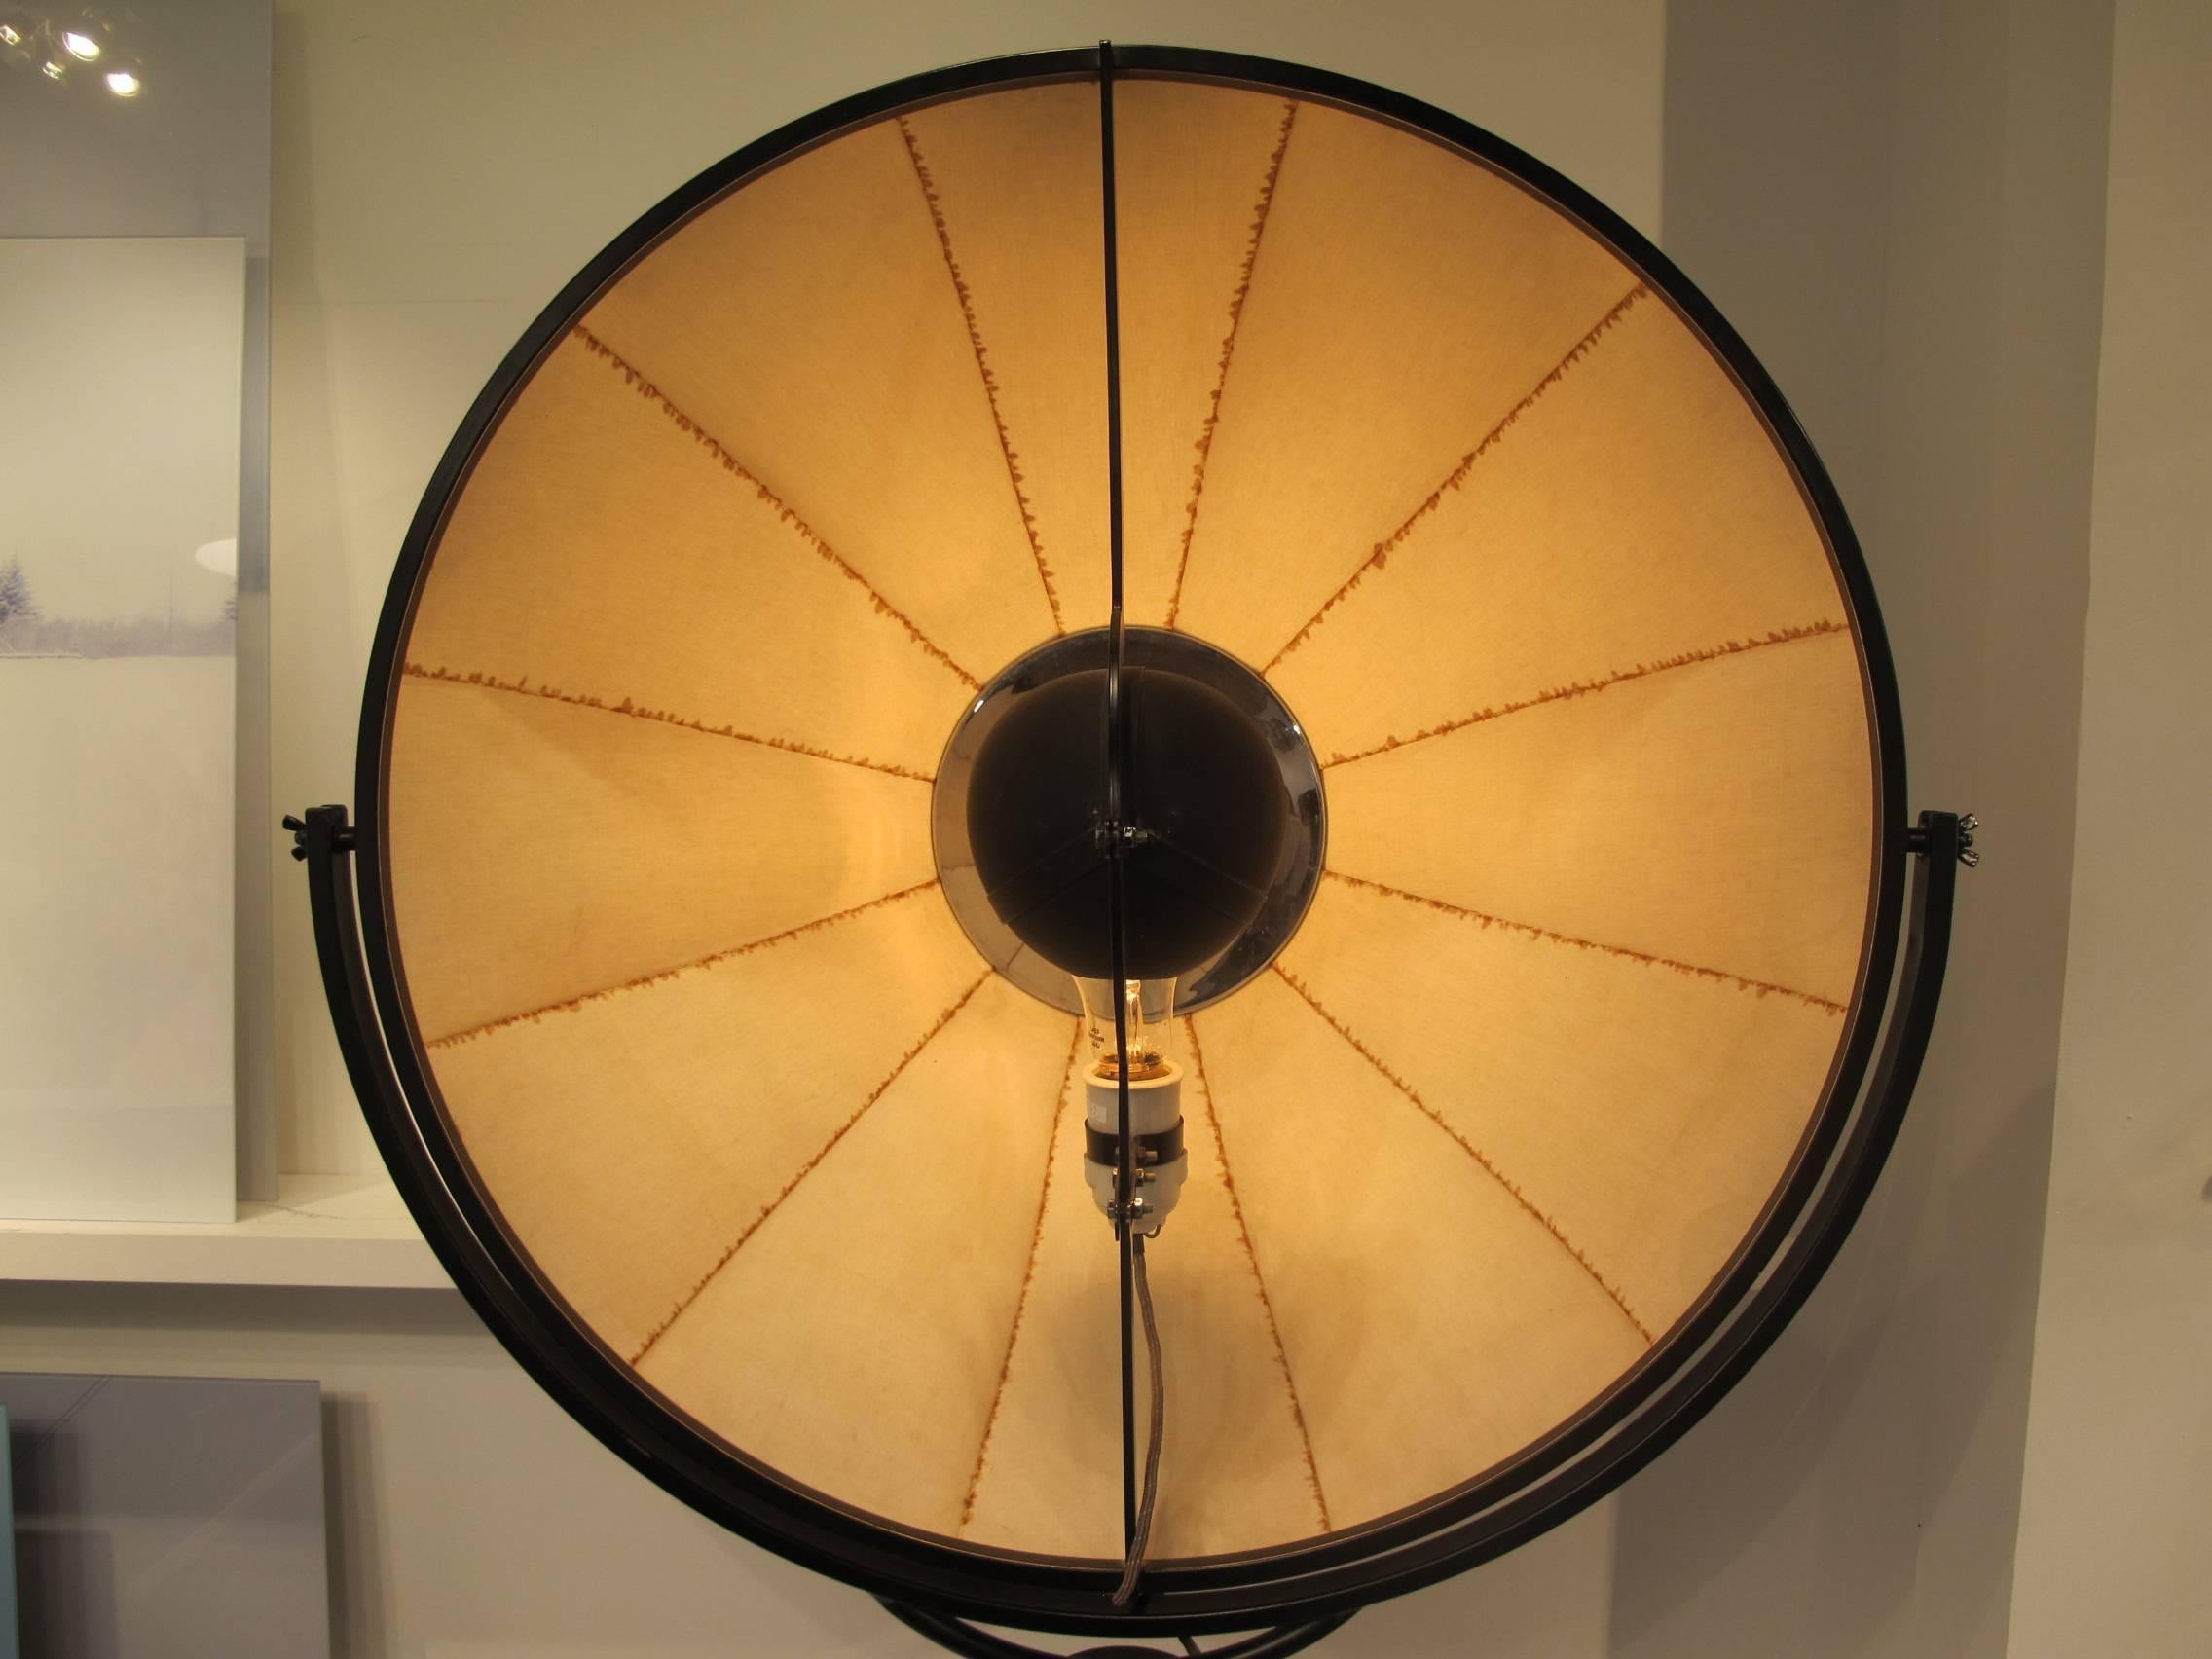 A vintage photographer's lamp by Mariano Fortuny, circa 1960.
Features a large Fabric Shade on a movable arm, mounted on a metal Tri-pod bas with adjustable height mechanism.
An early original example of modern Italian Design